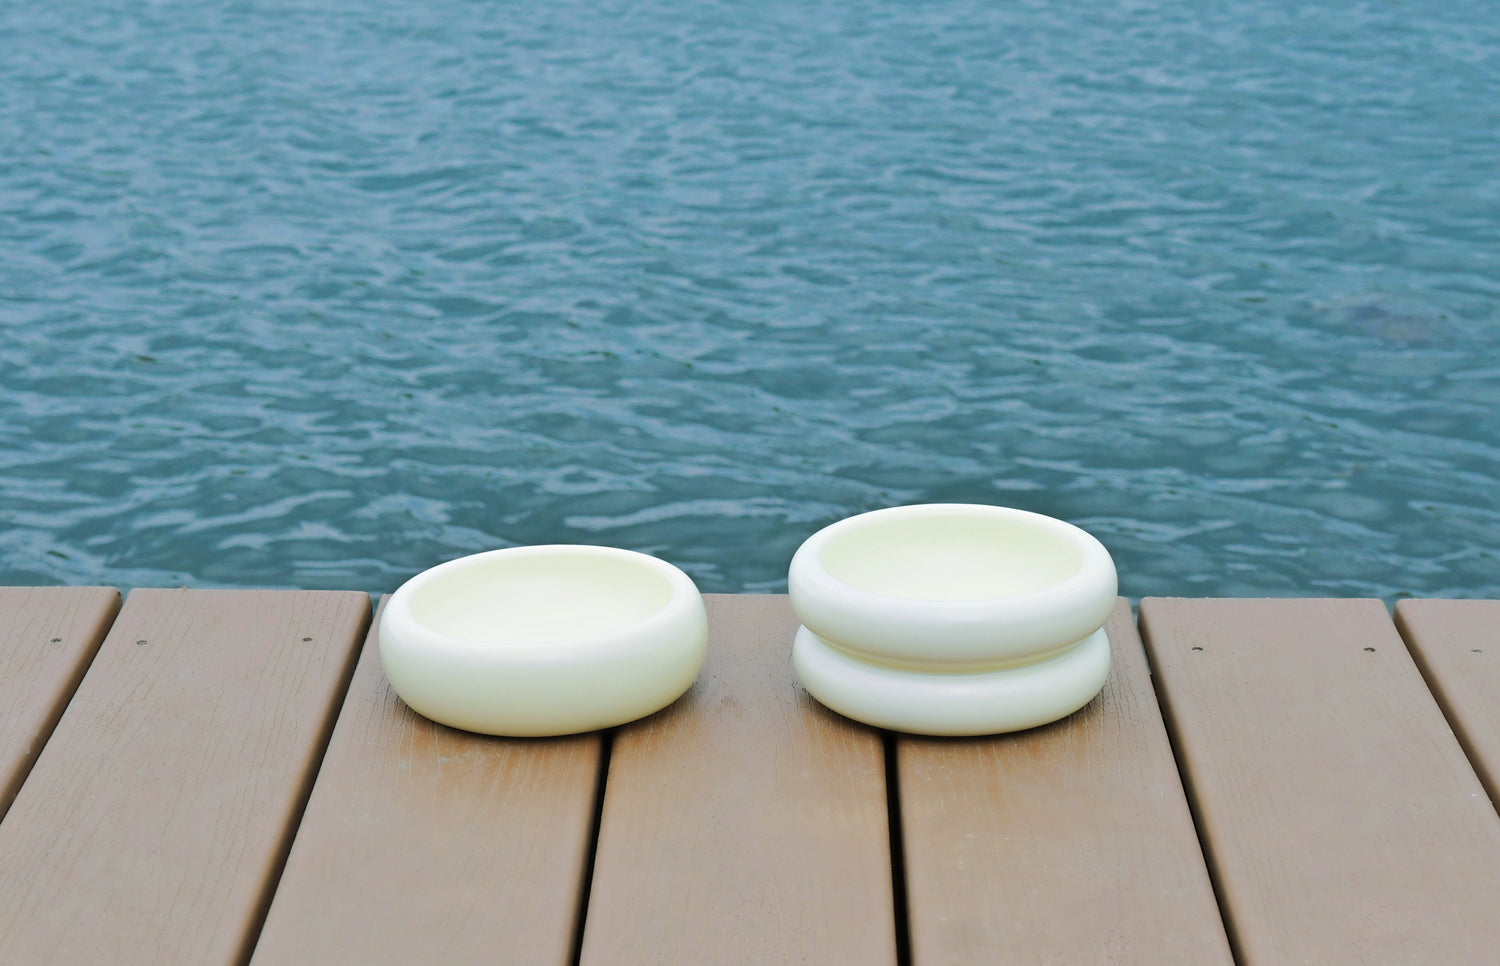 catenary modern cat bowls that prevent whisker fatigue on pier by lake or ocean water